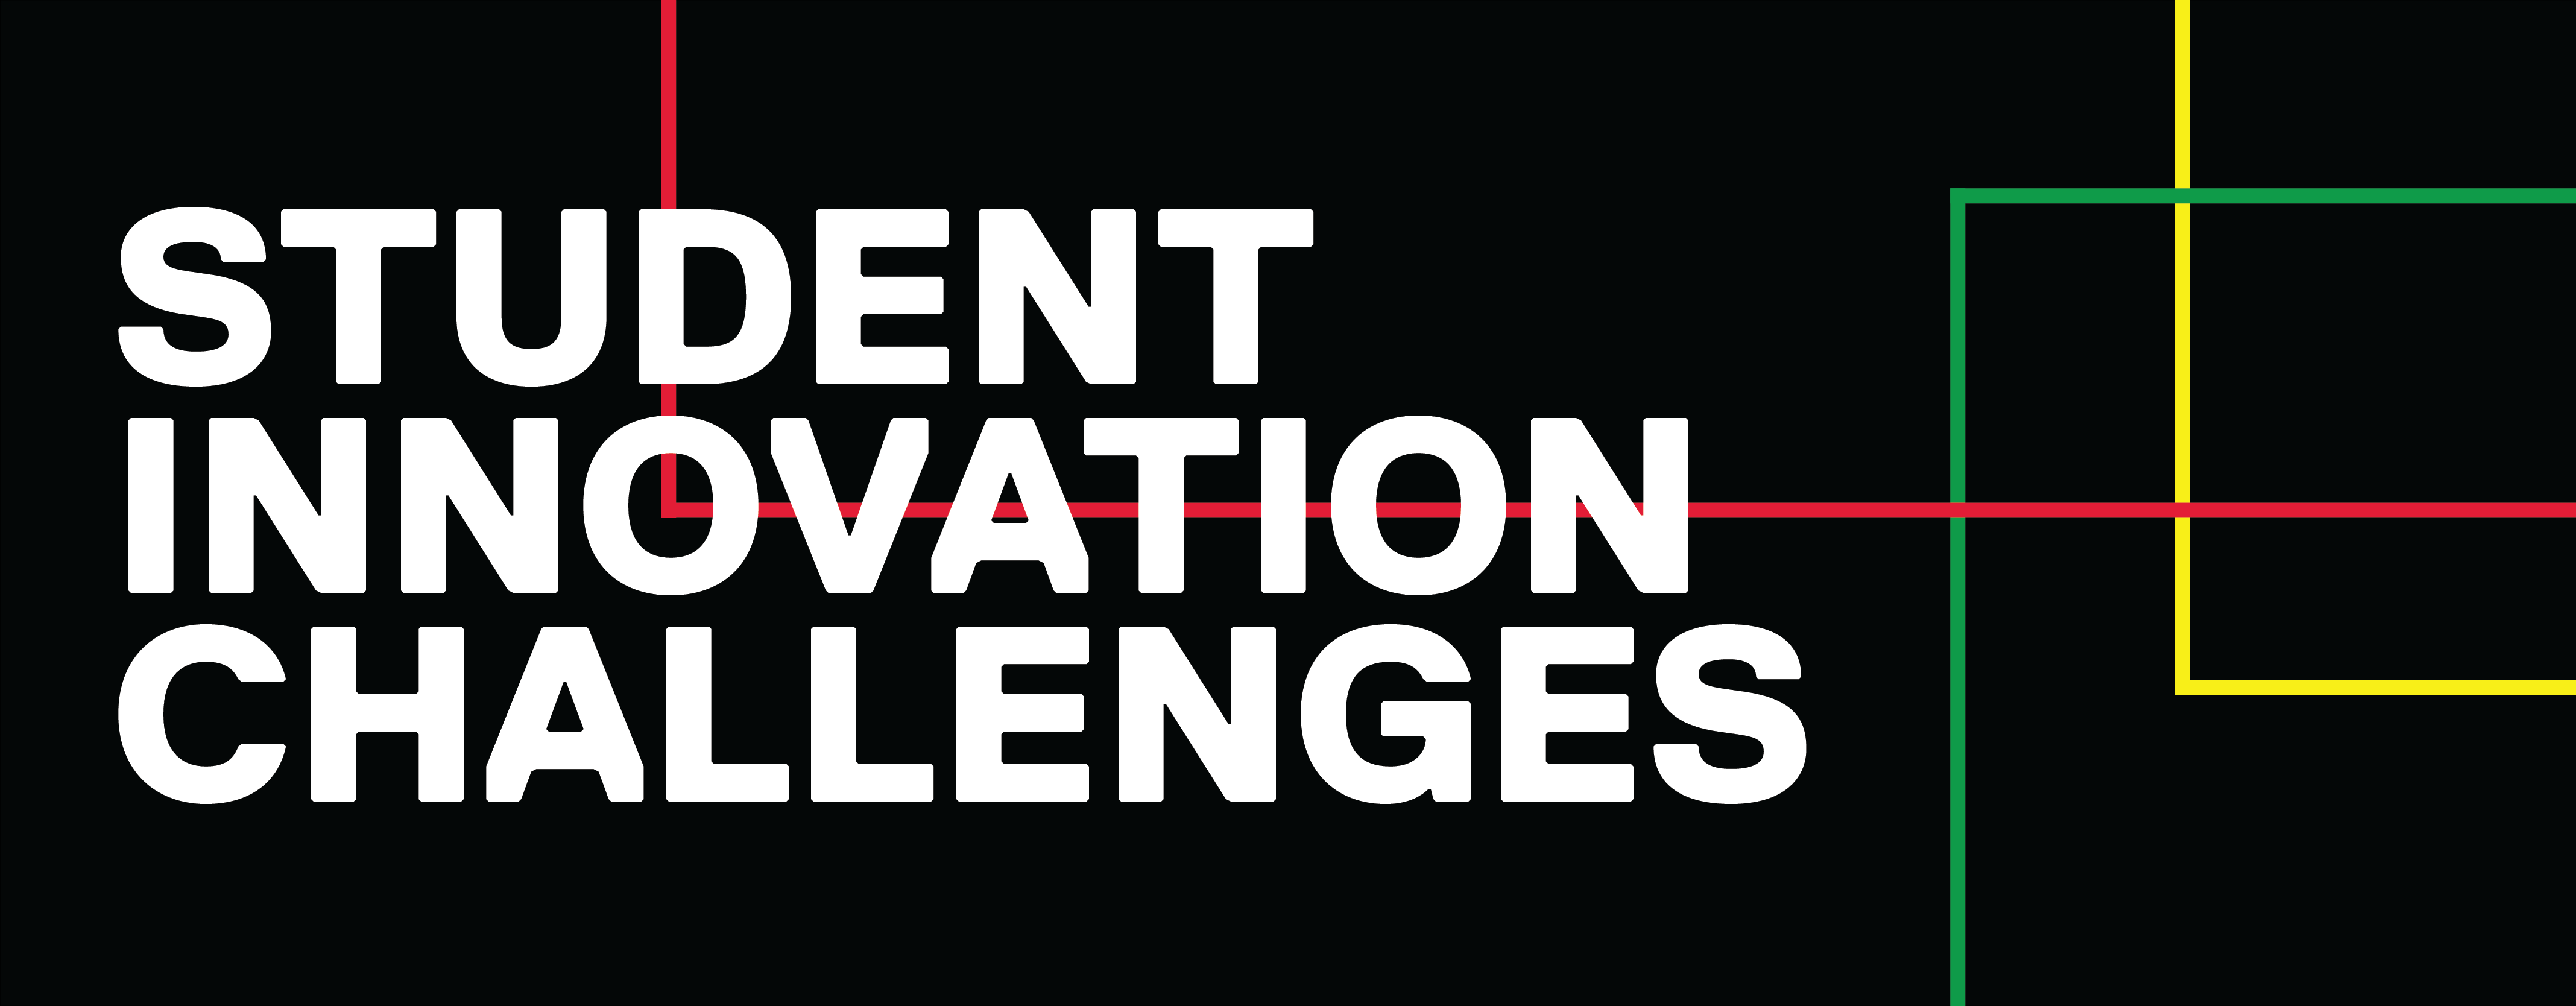 This reads "Student Innovation Challenges" in white text overtop a solid black background. There are intersecting lines used to decorate the banner. These lines are red, green, and yellow.